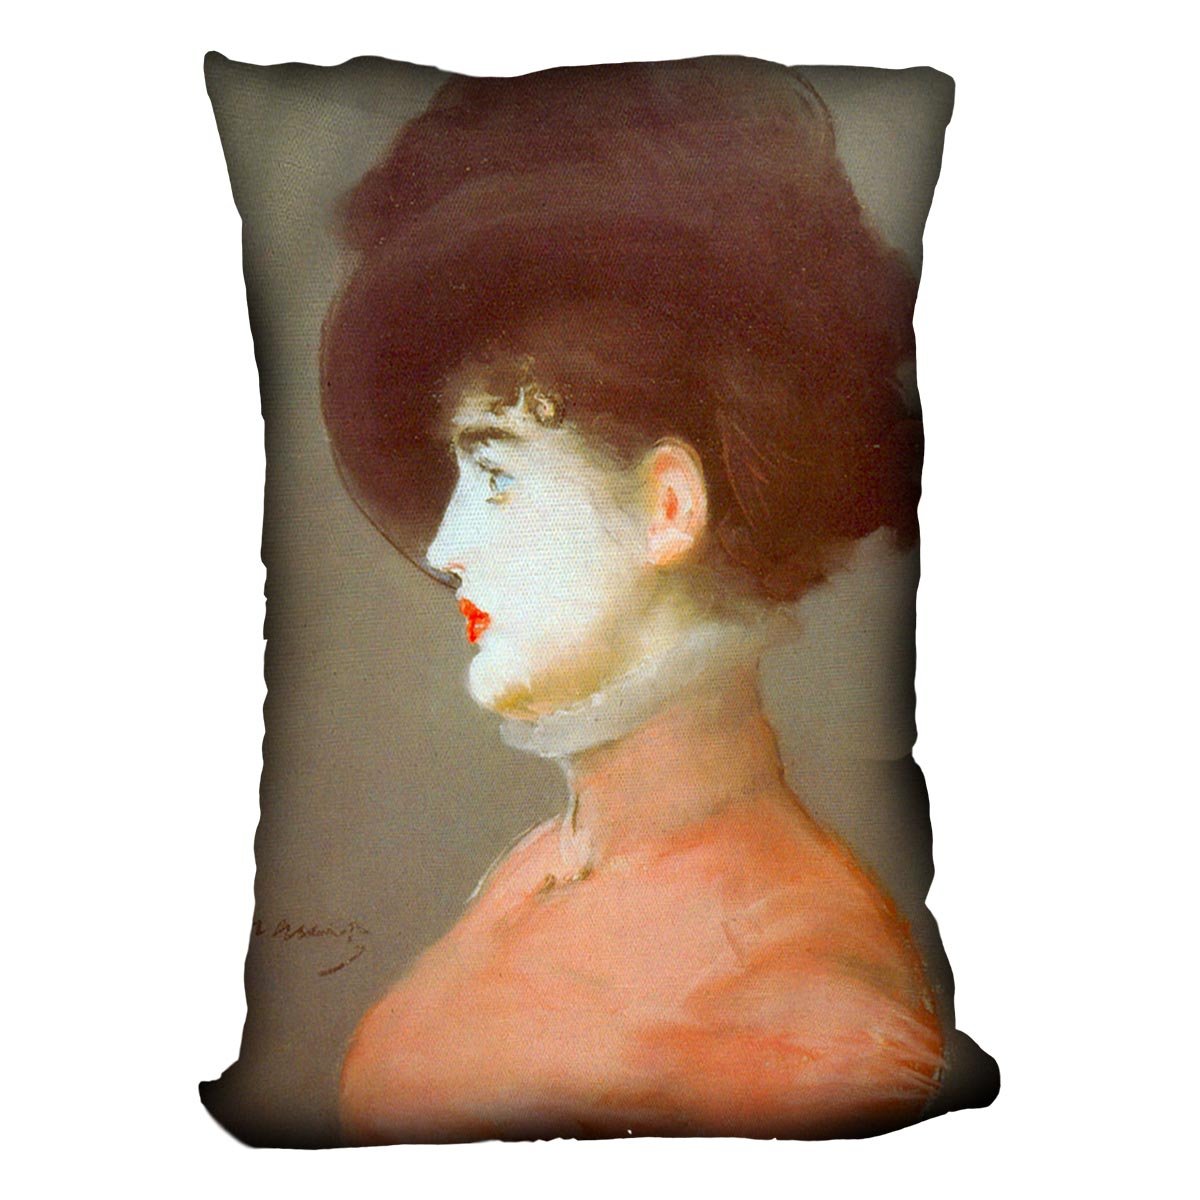 Irma Brunne by Manet Throw Pillow